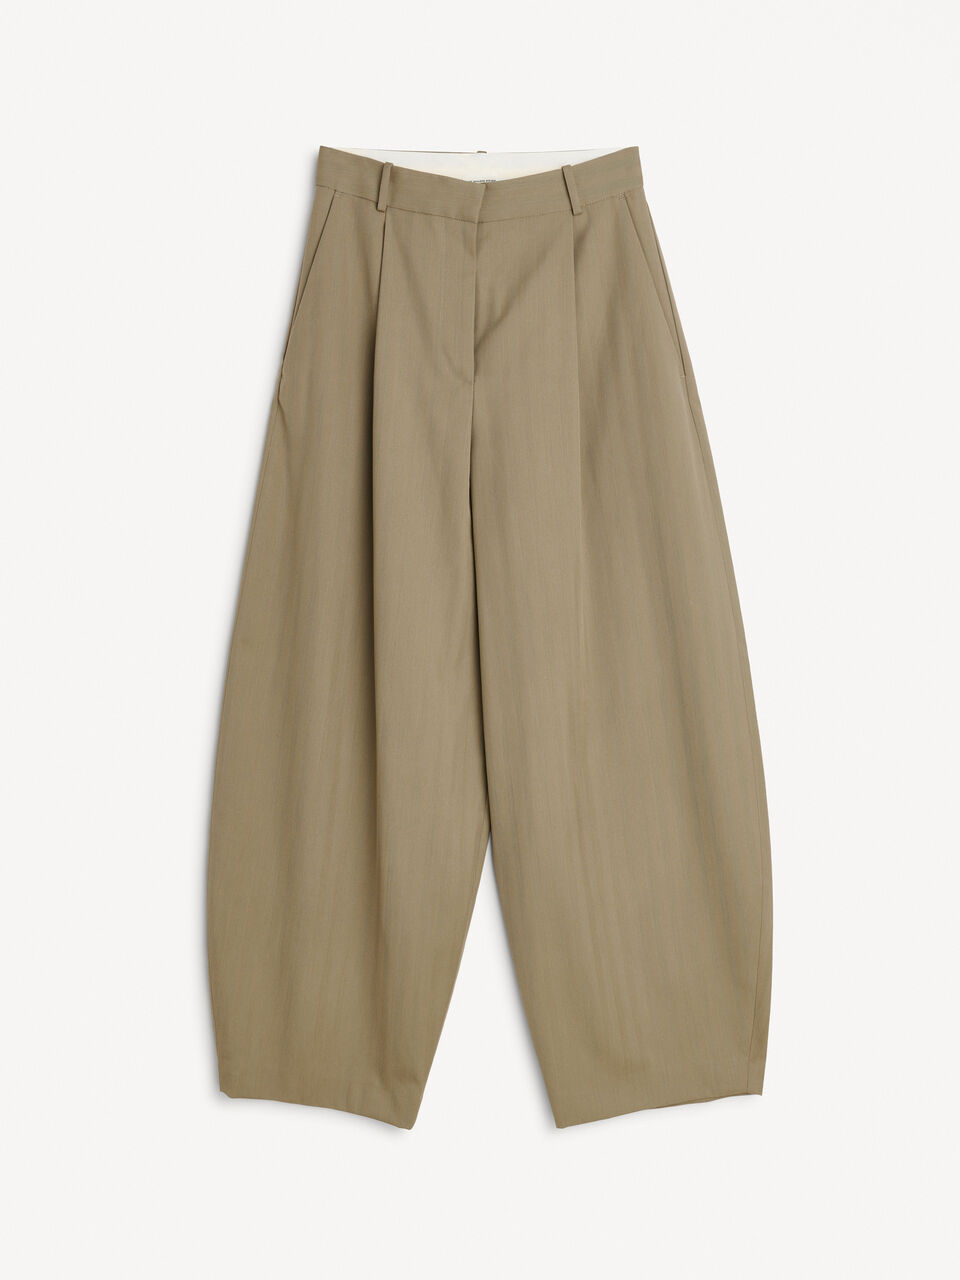 Povilo's high-waisted trousers